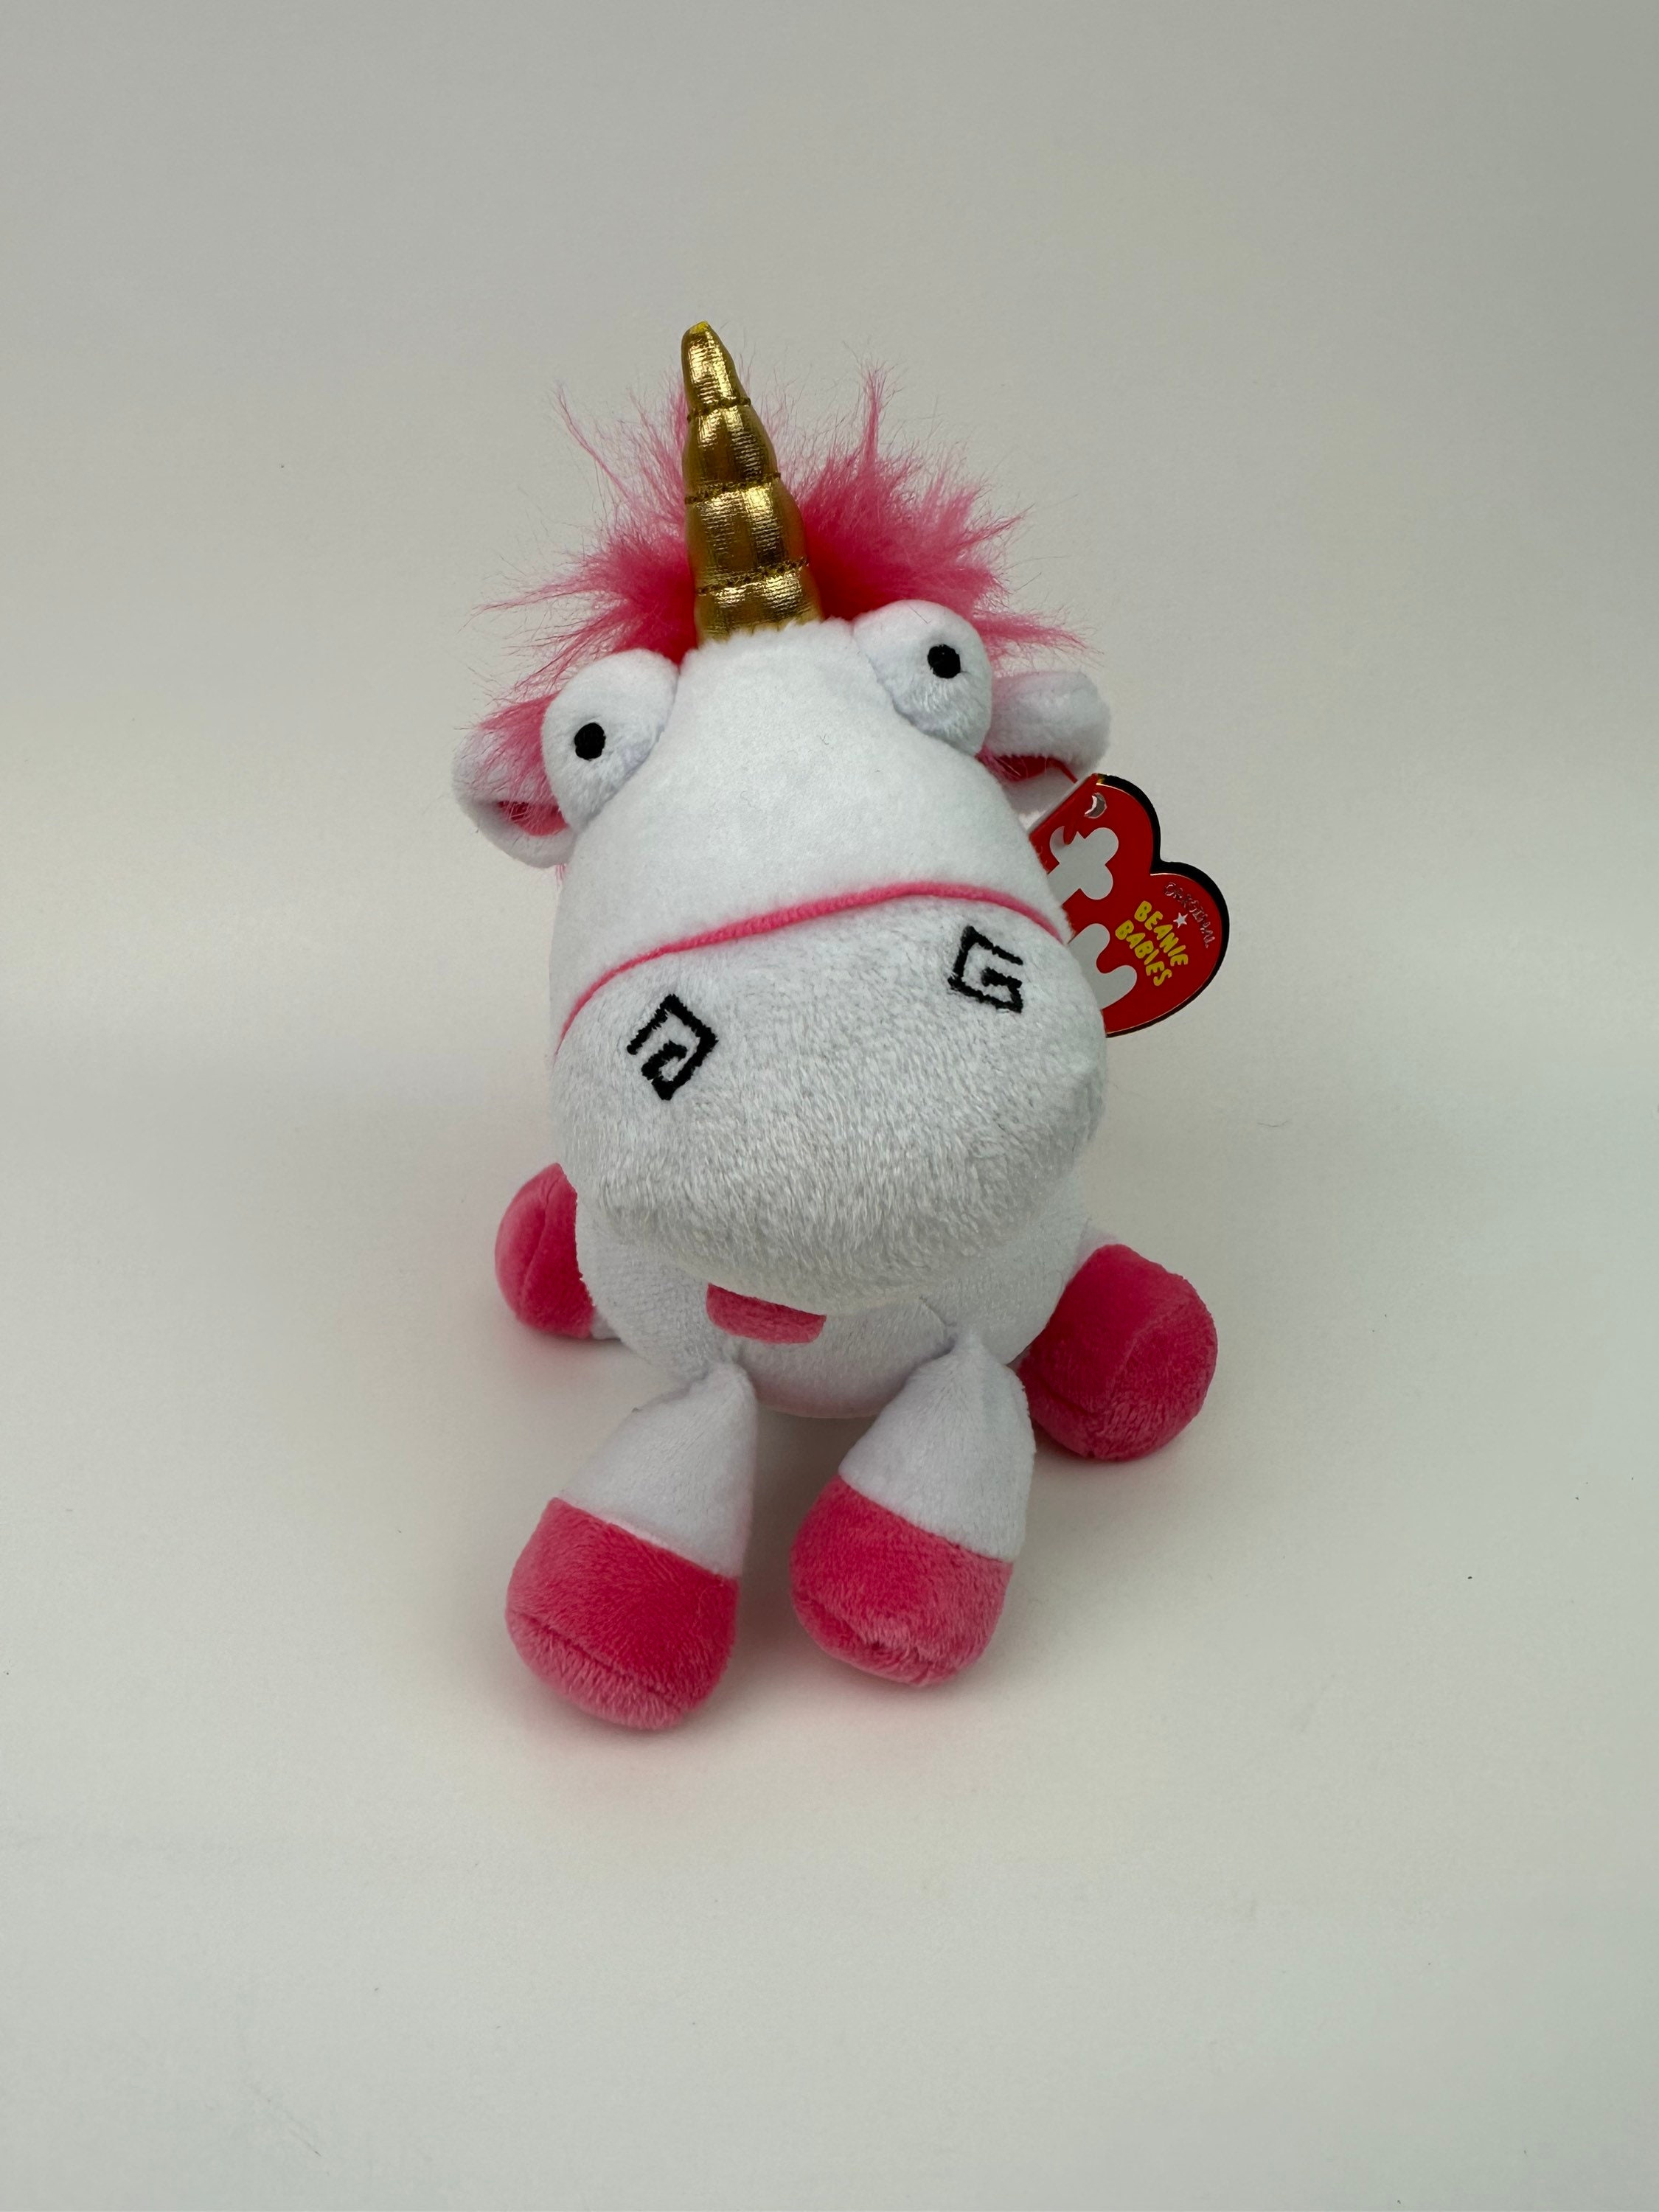 Unicorn Plush Toy, Despicable Me 3, Light-Up Fluffy, Lights & Sound - NEW  IN BOX